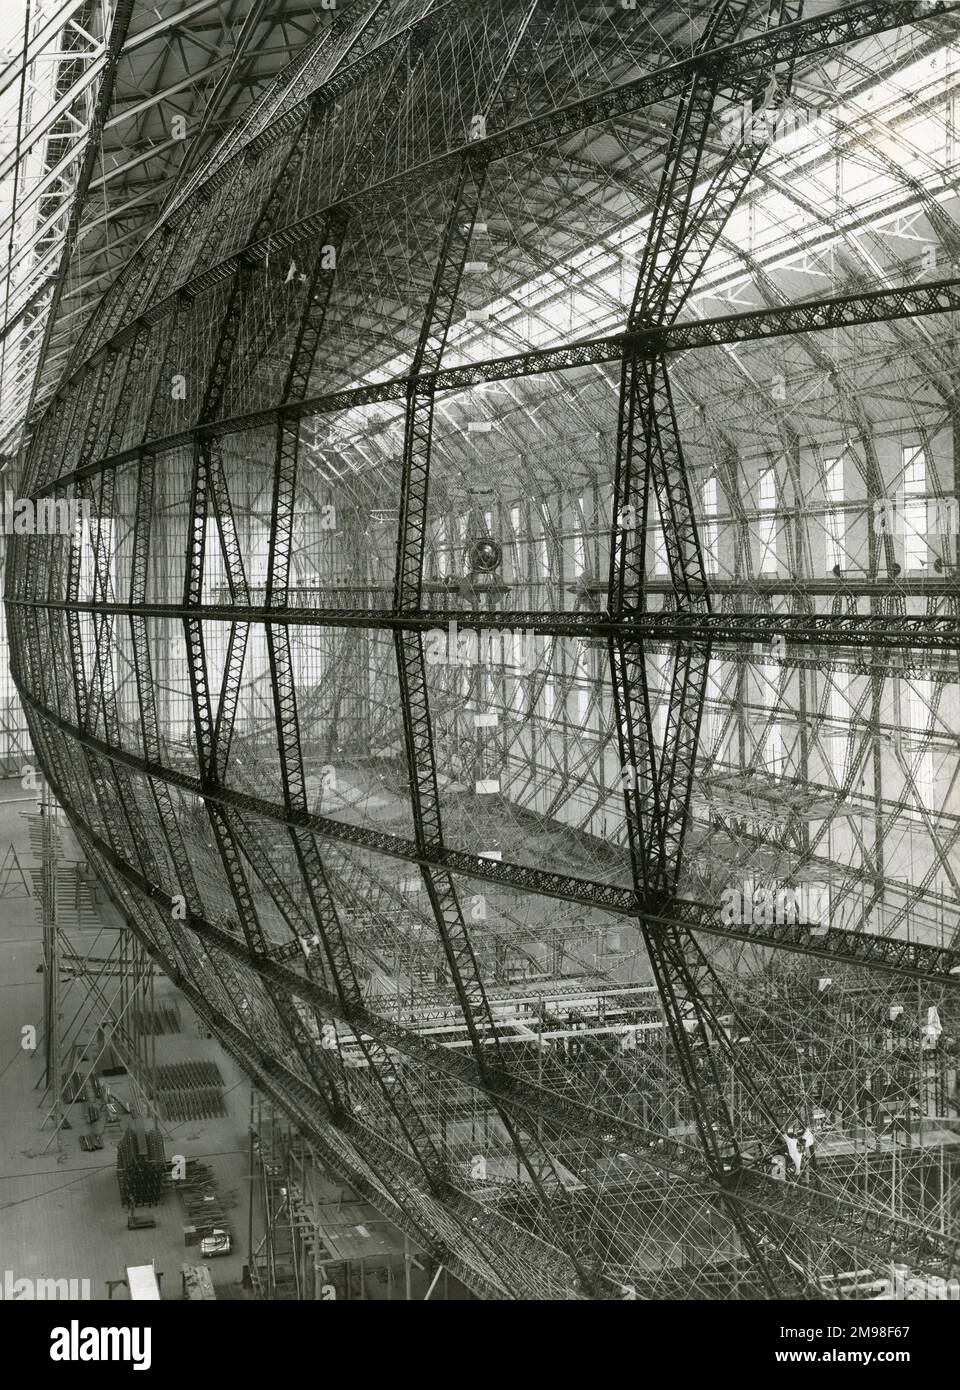 Assembled at Friedrichshafen during 1932-1936, the Hindenburg?s hull was composed of a ring structure of duralumin girders and bracing wires. Stock Photo